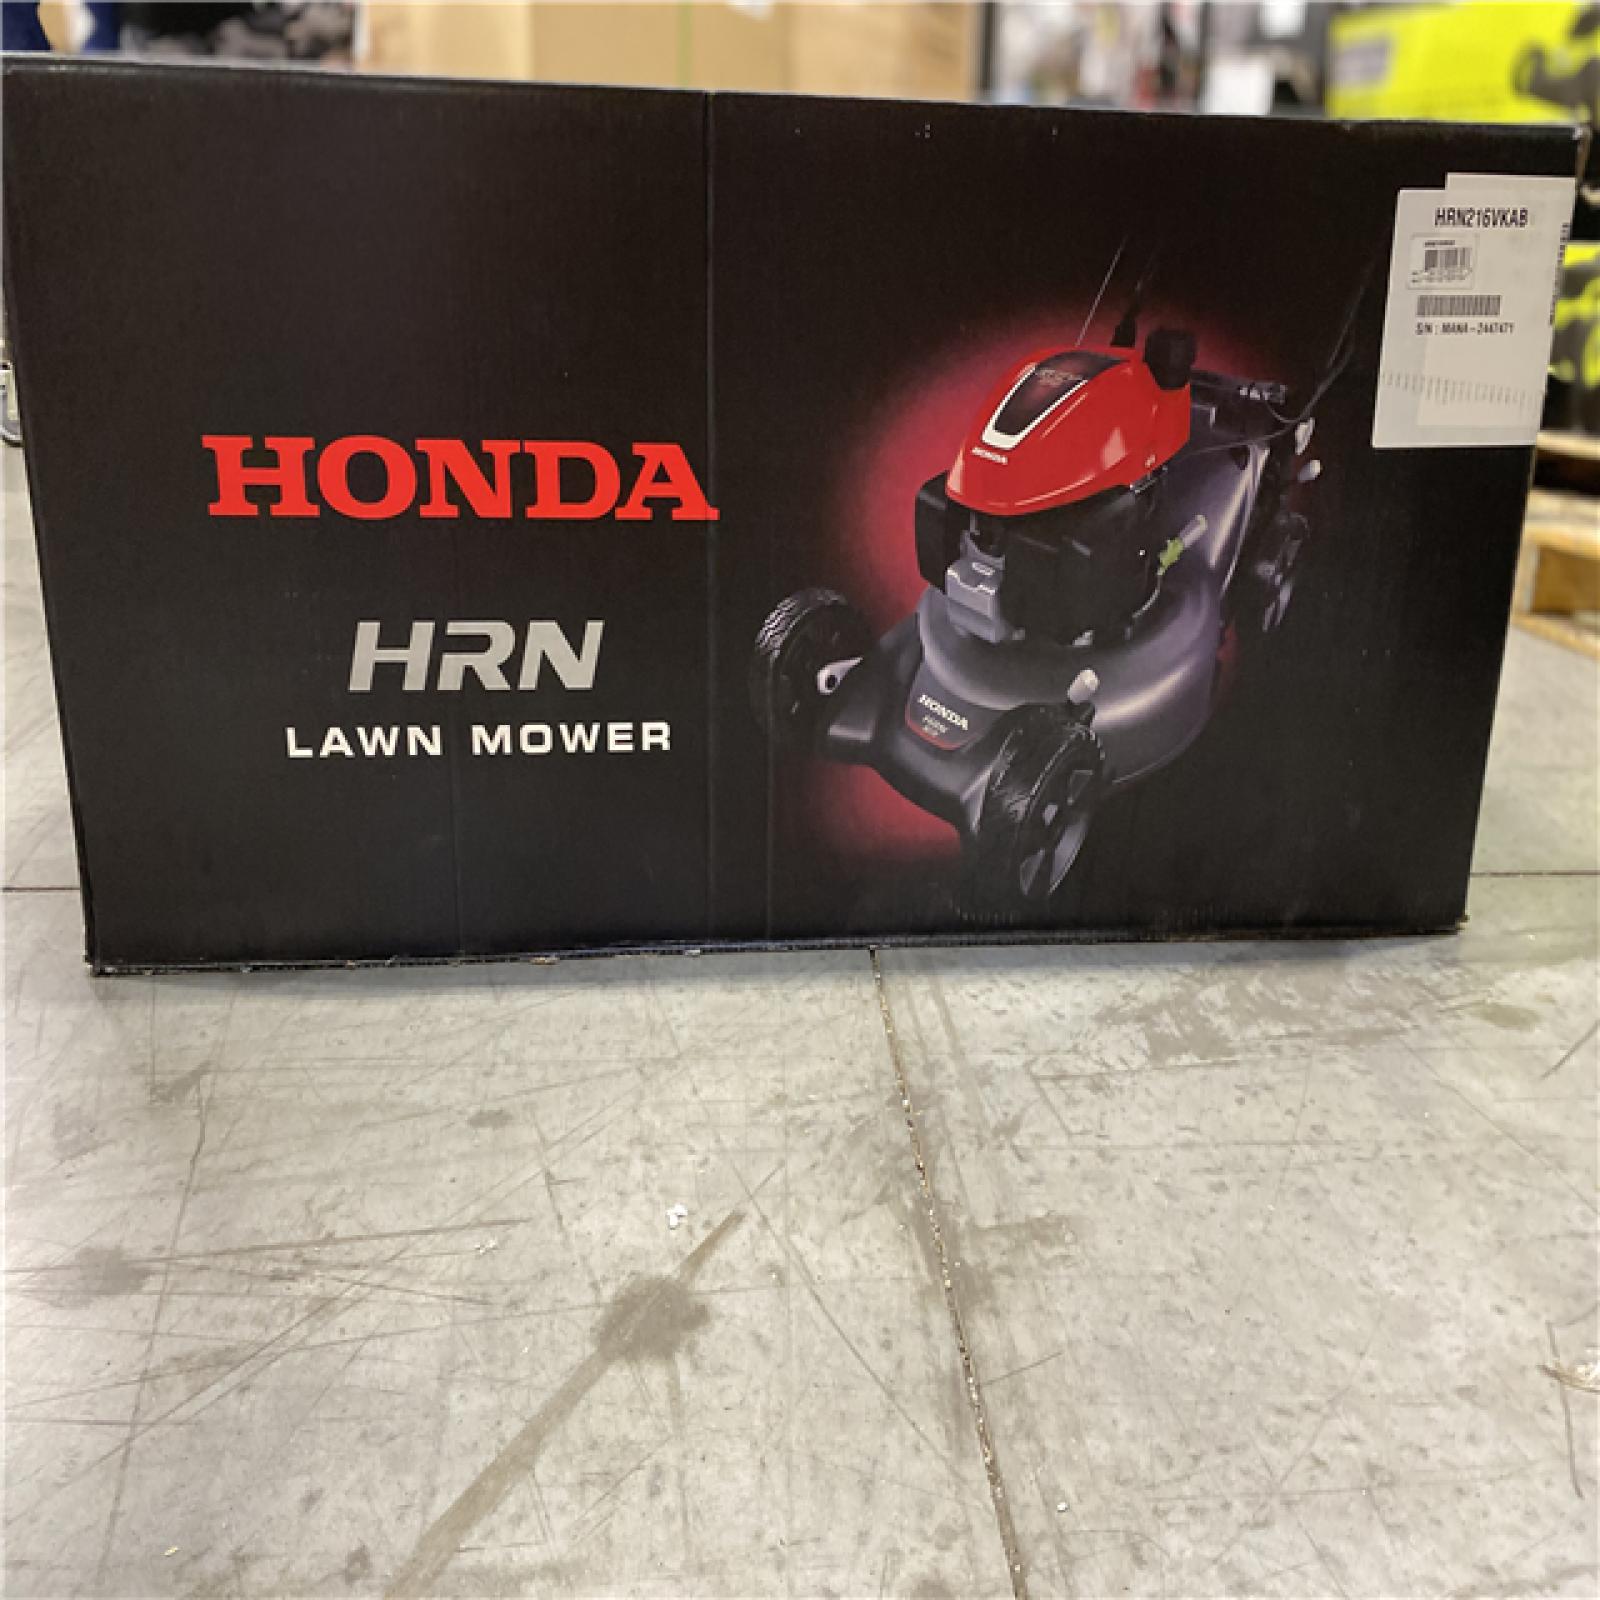 DALLAS LOCATION -  Honda 21 in. 3-in-1 Variable Speed Gas Walk Behind Self-Propelled Lawn Mower with Auto Choke